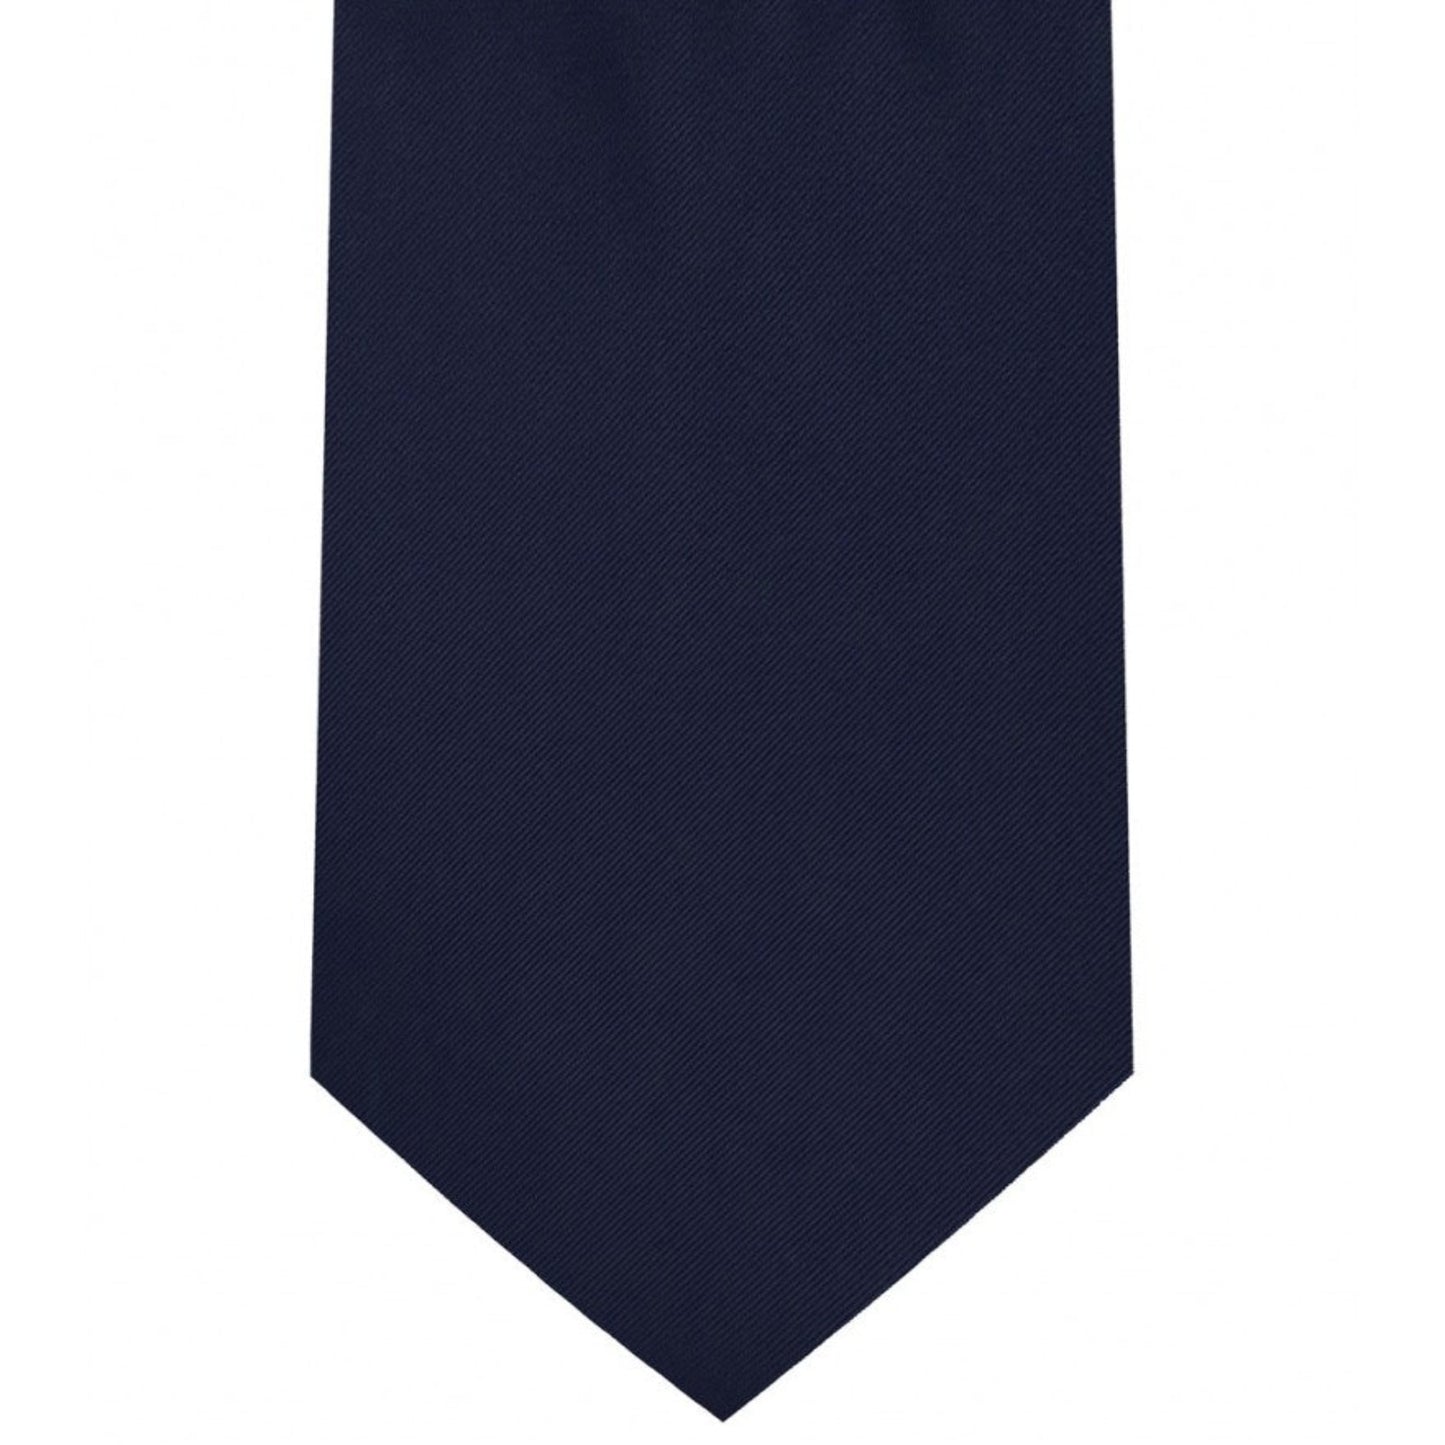 Classic Dark Navy Tie Regular width 3.5 inches With Matching Pocket Square | KCT Menswear